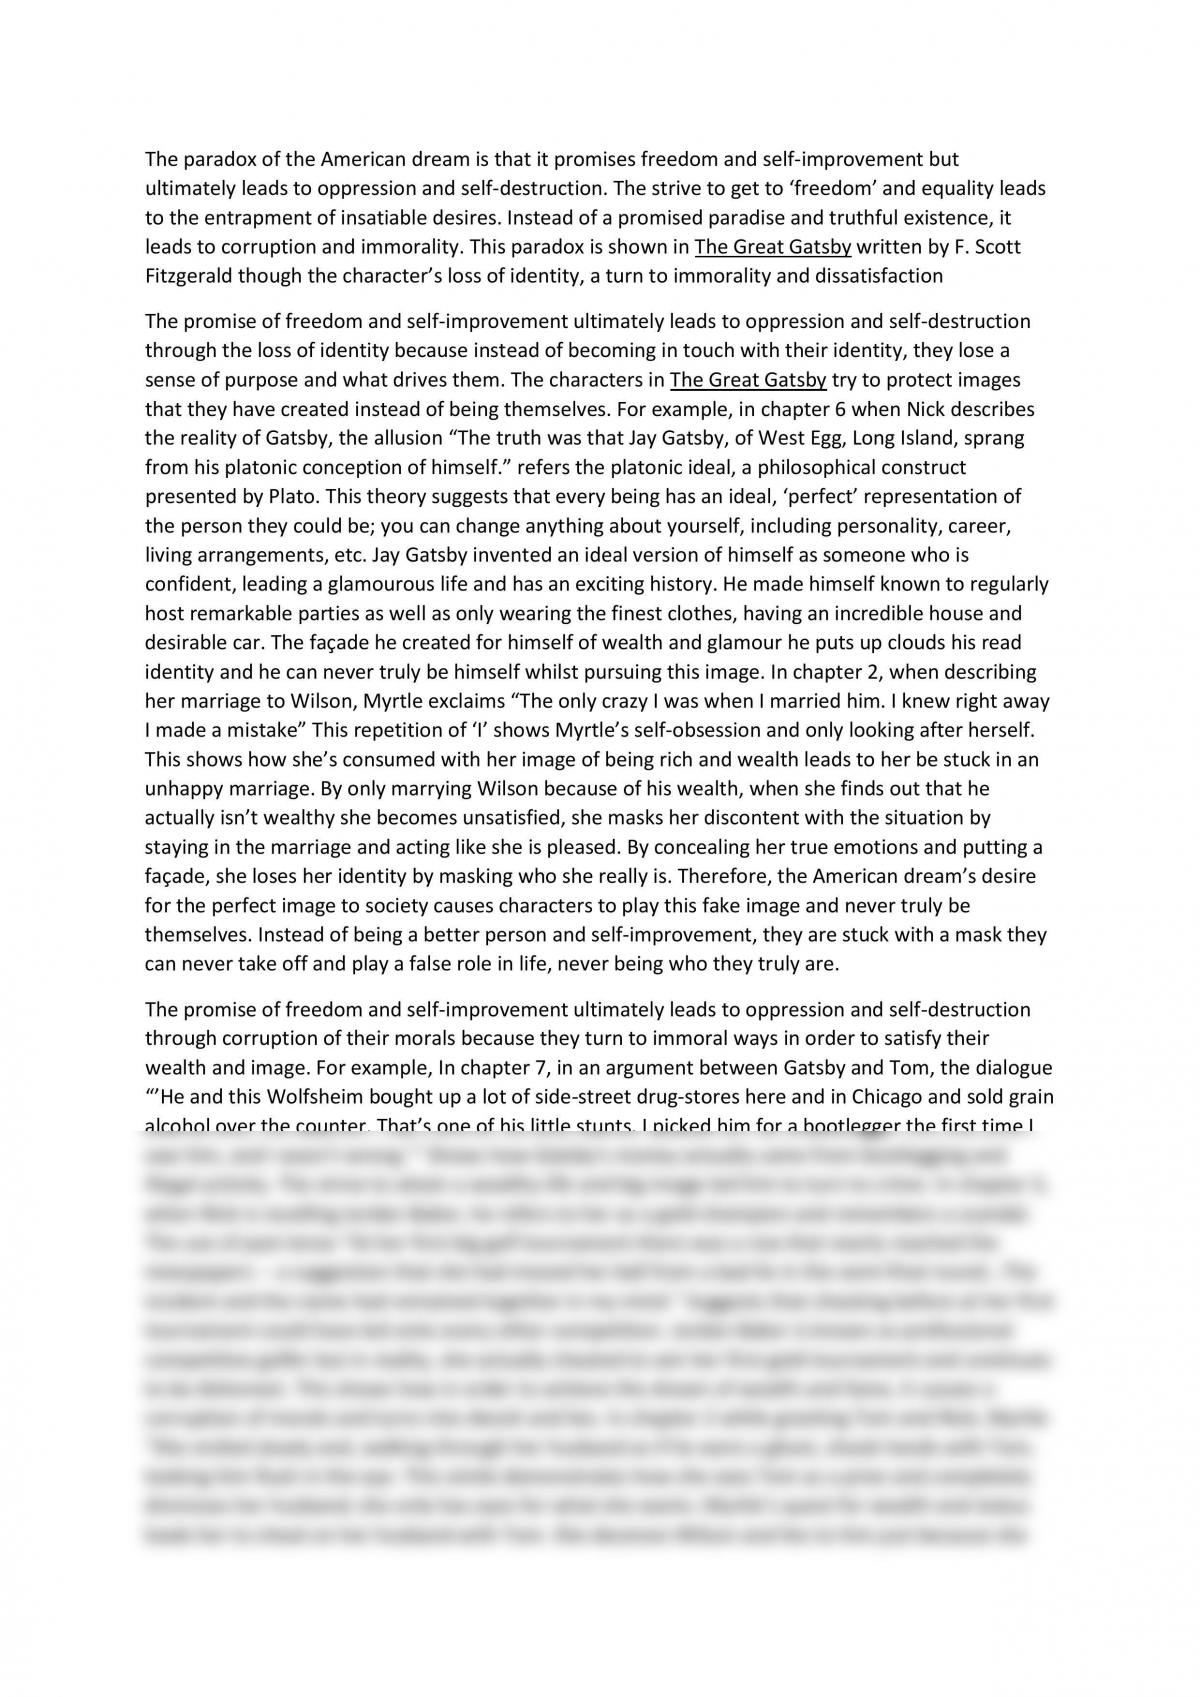 essay about american dream great gatsby